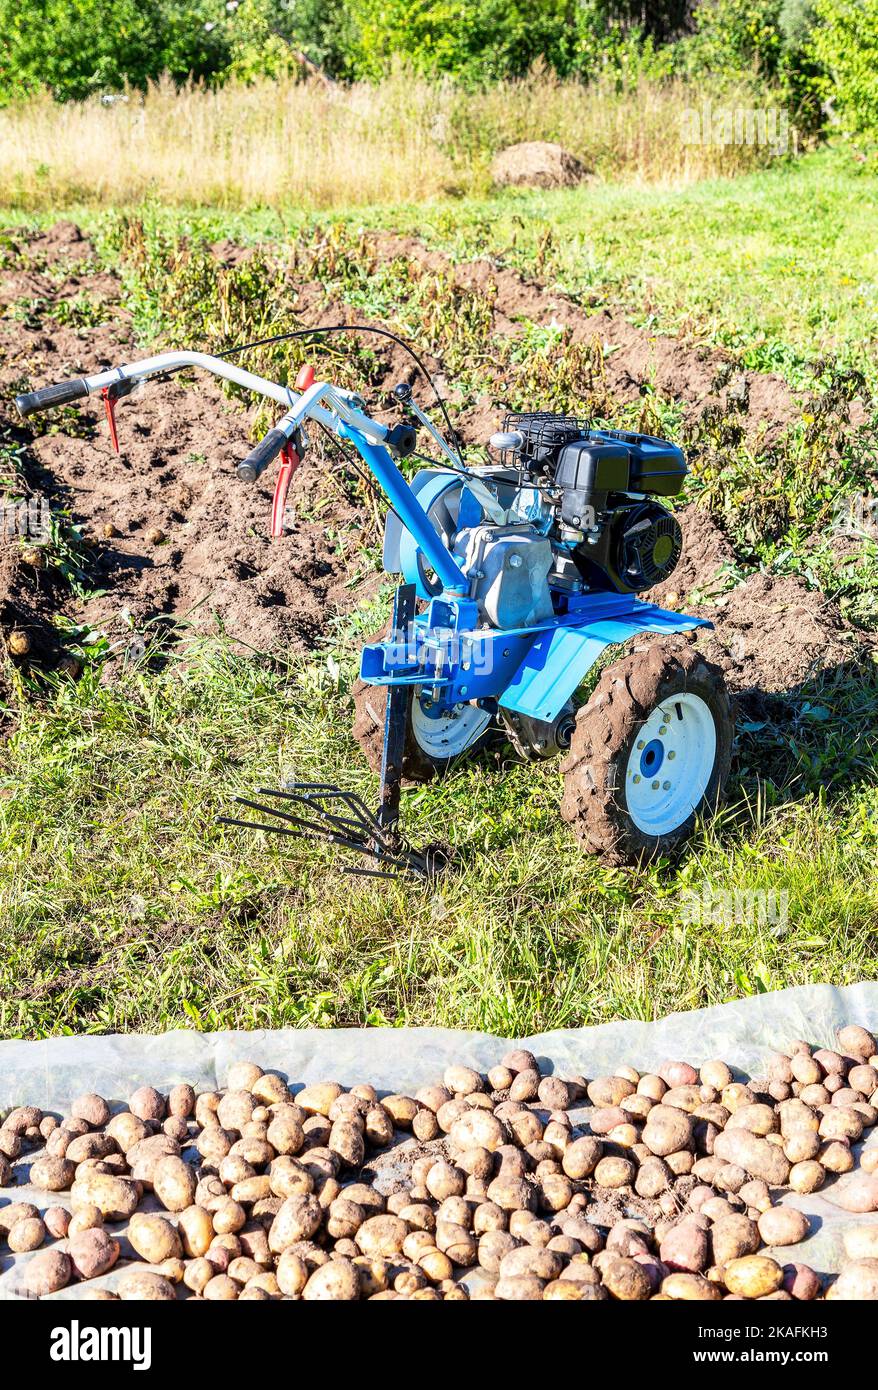 Harvesting potatoes with a walk-behind tractor. Walk-behind tractor works on harvesting potatoes Stock Photo